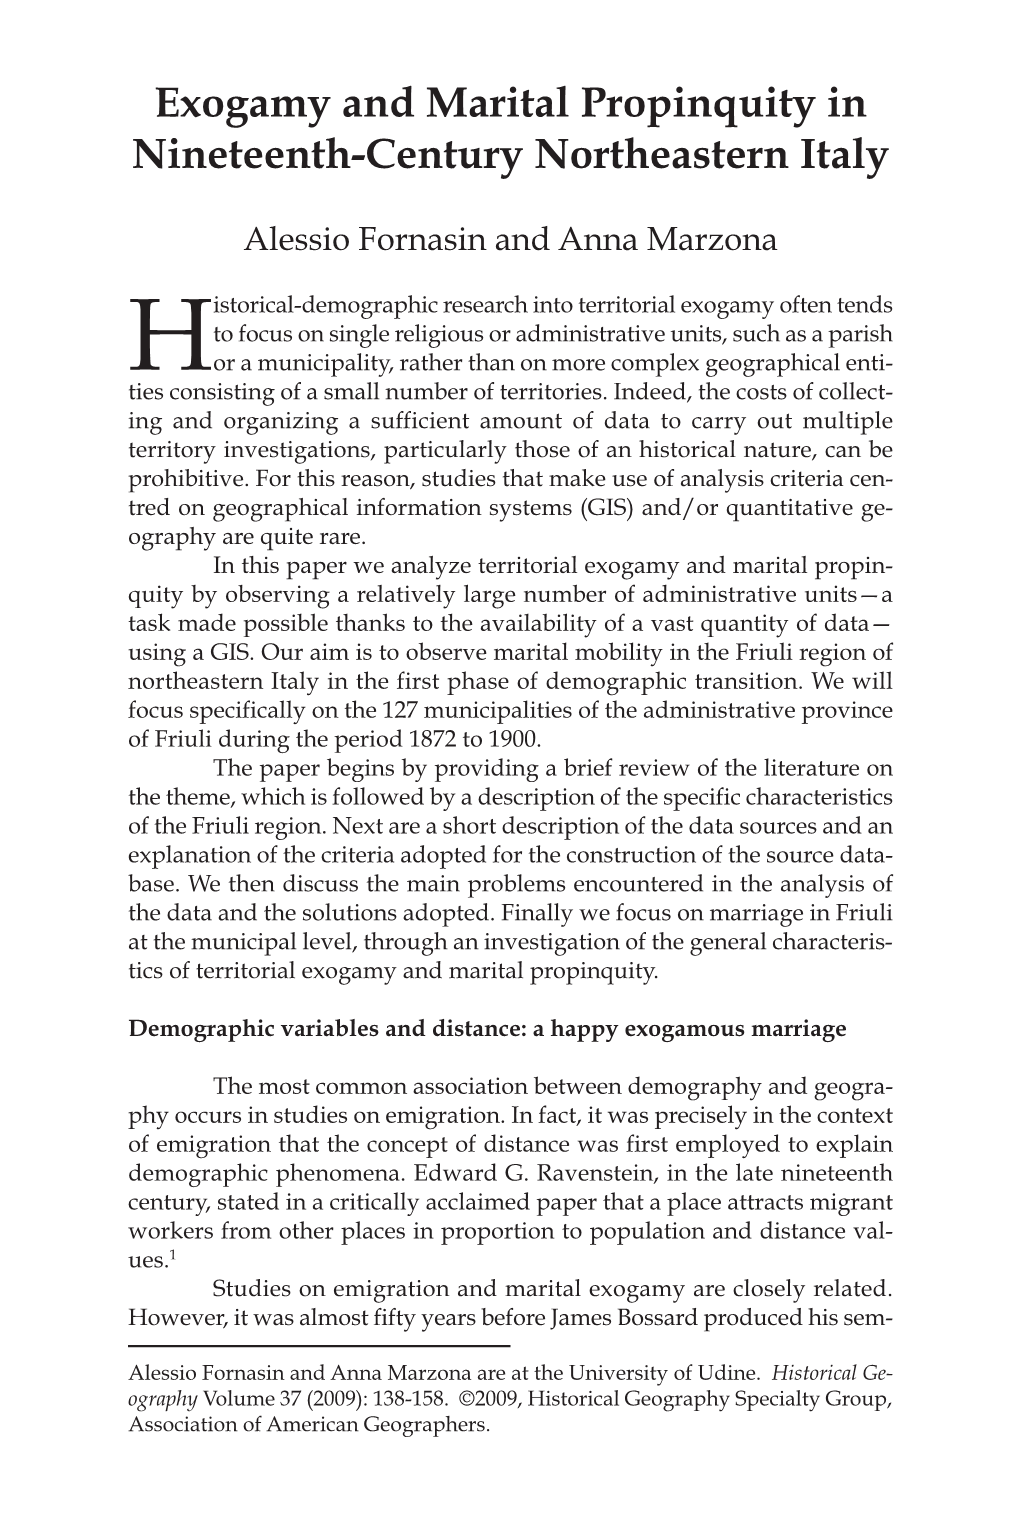 Exogamy and Marital Propinquity in Nineteenth-Century Northeastern Italy